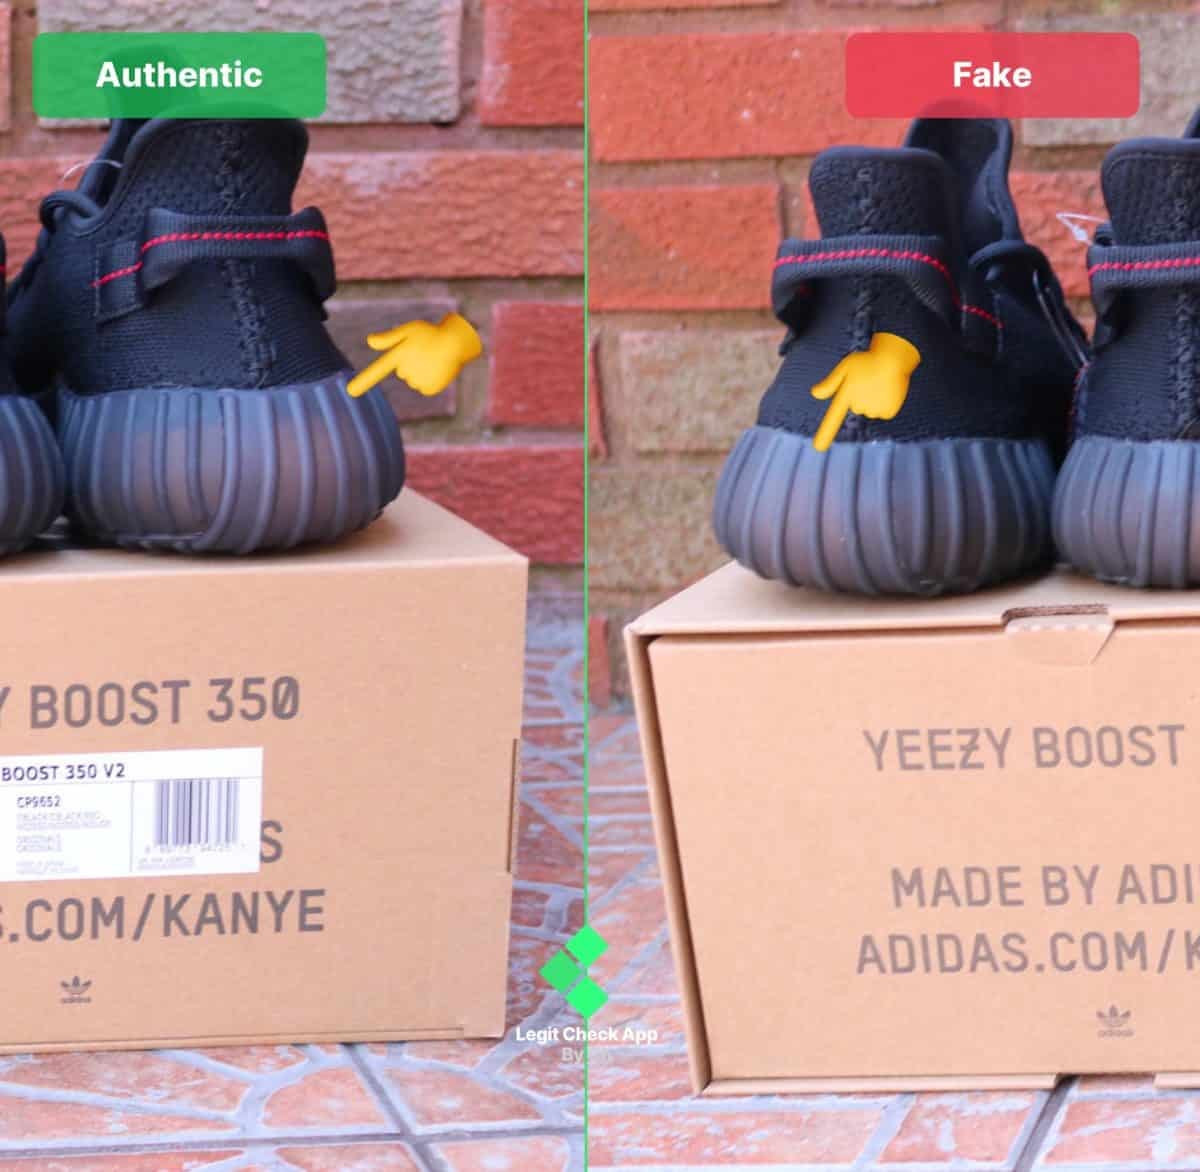 The Ultimate Real Vs Fake Yeezy Boost 350 V2 Bred (Black Red) Guide —  Updated 2021 | by Legit Check By Ch | Medium